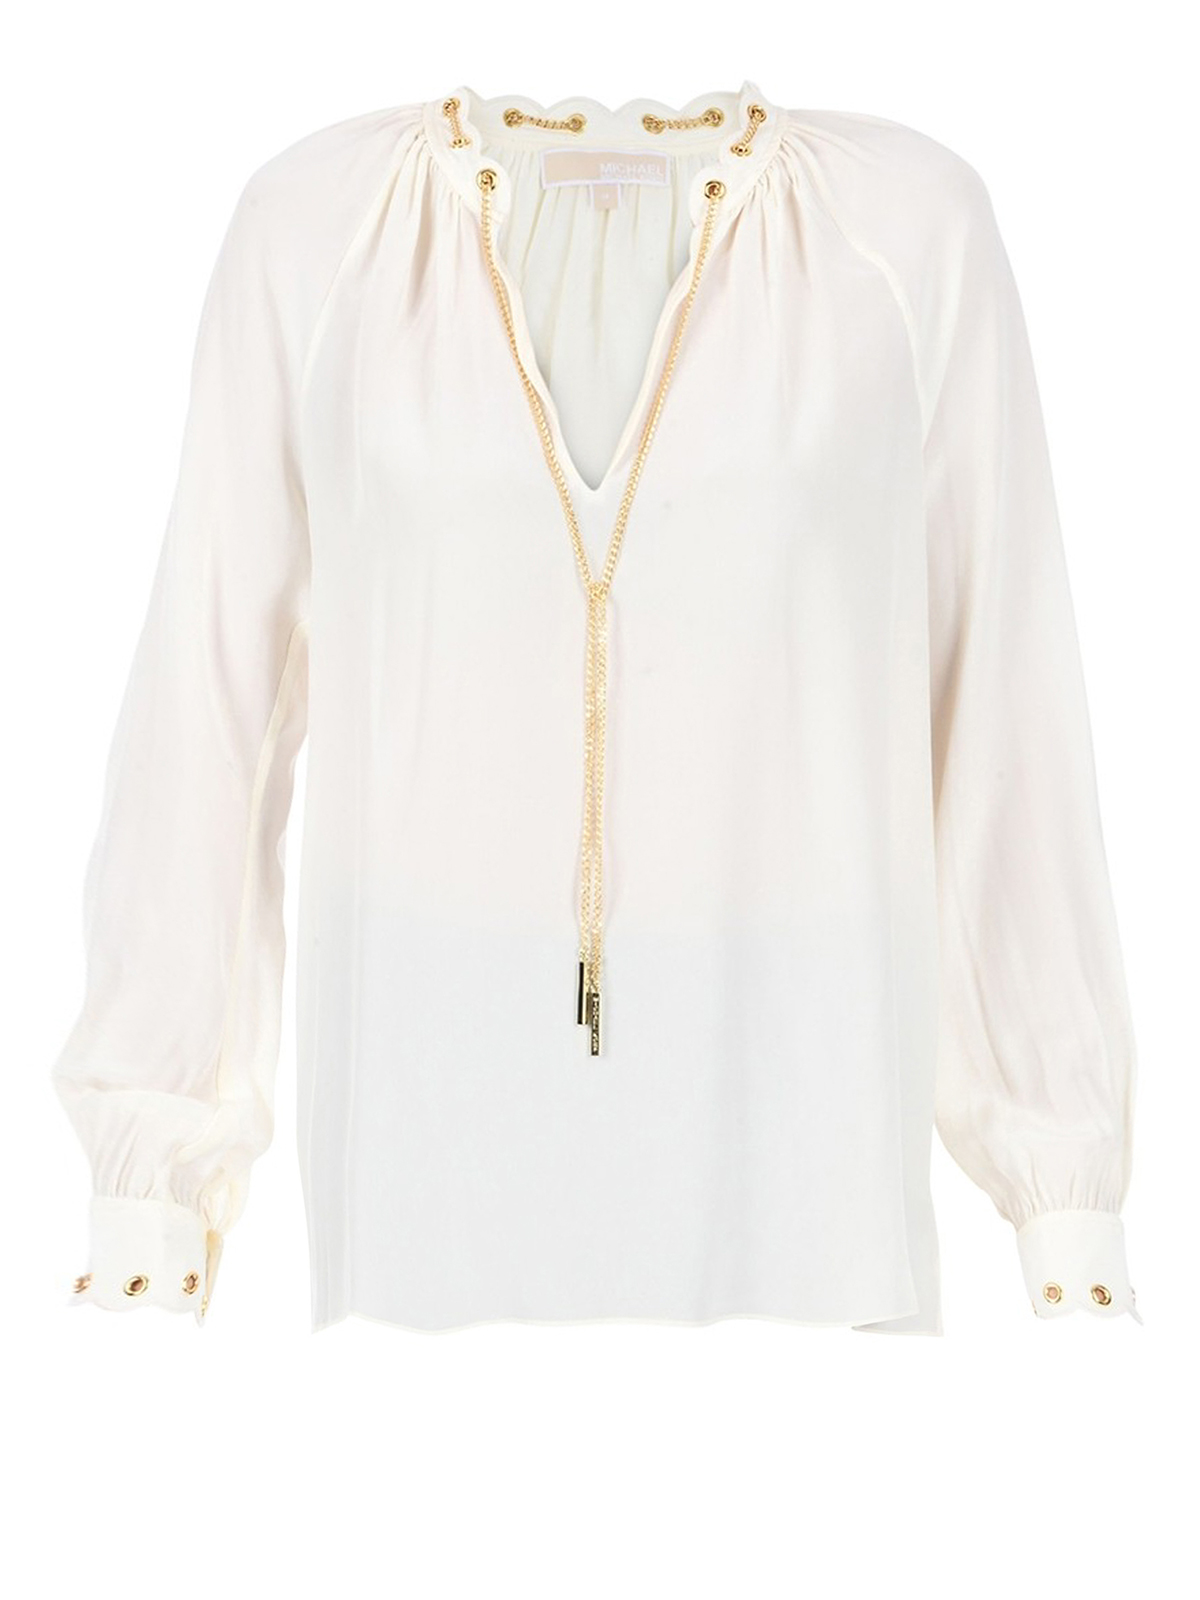 michael kors blouse with gold chain